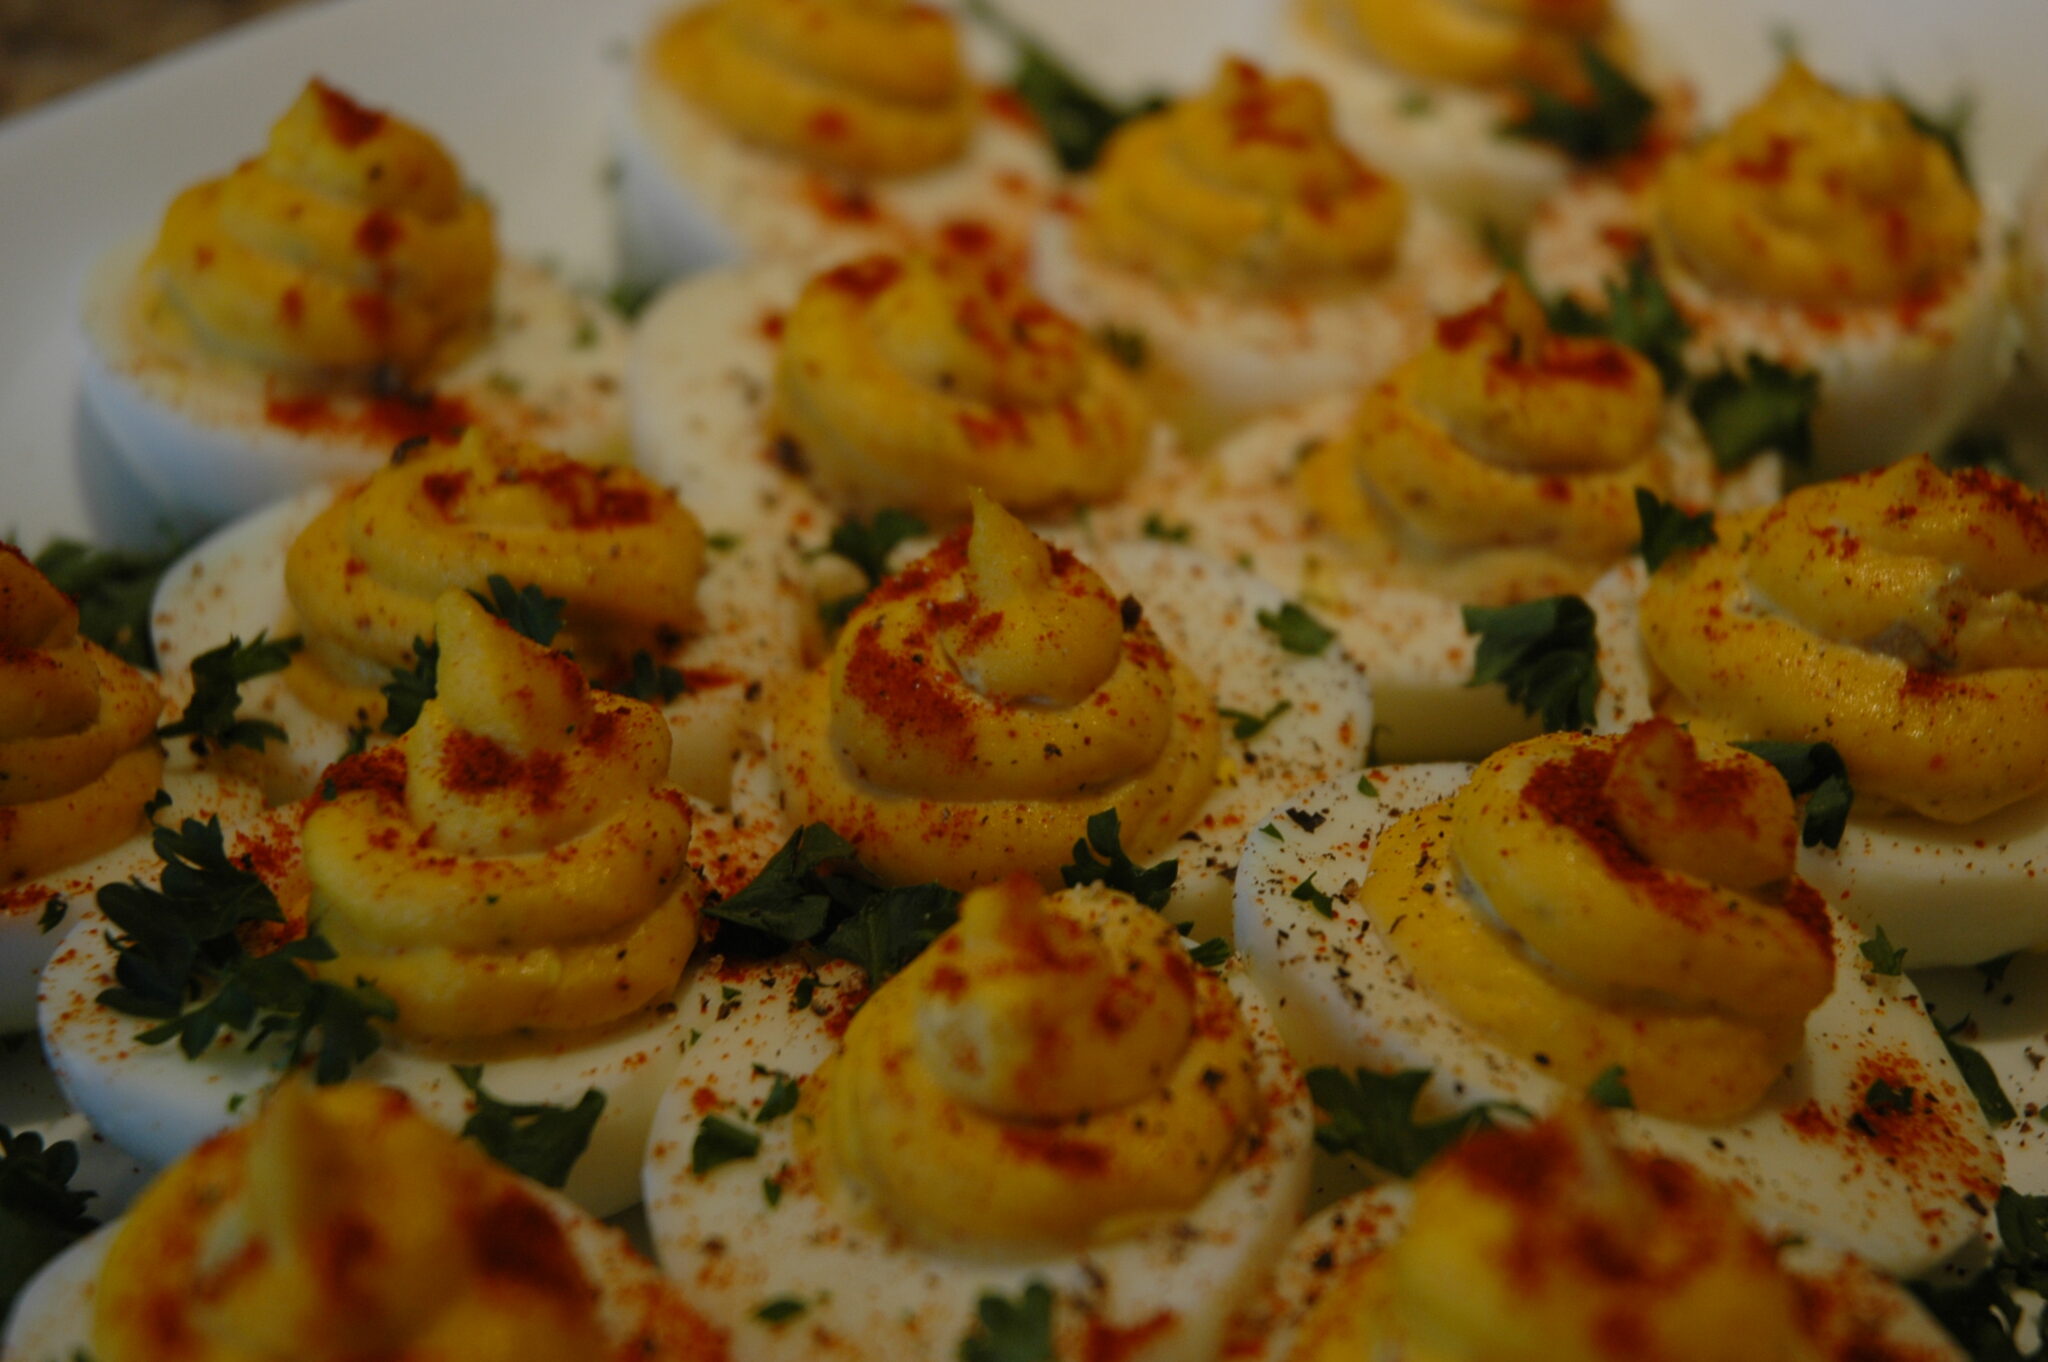 Deviled eggs with curry